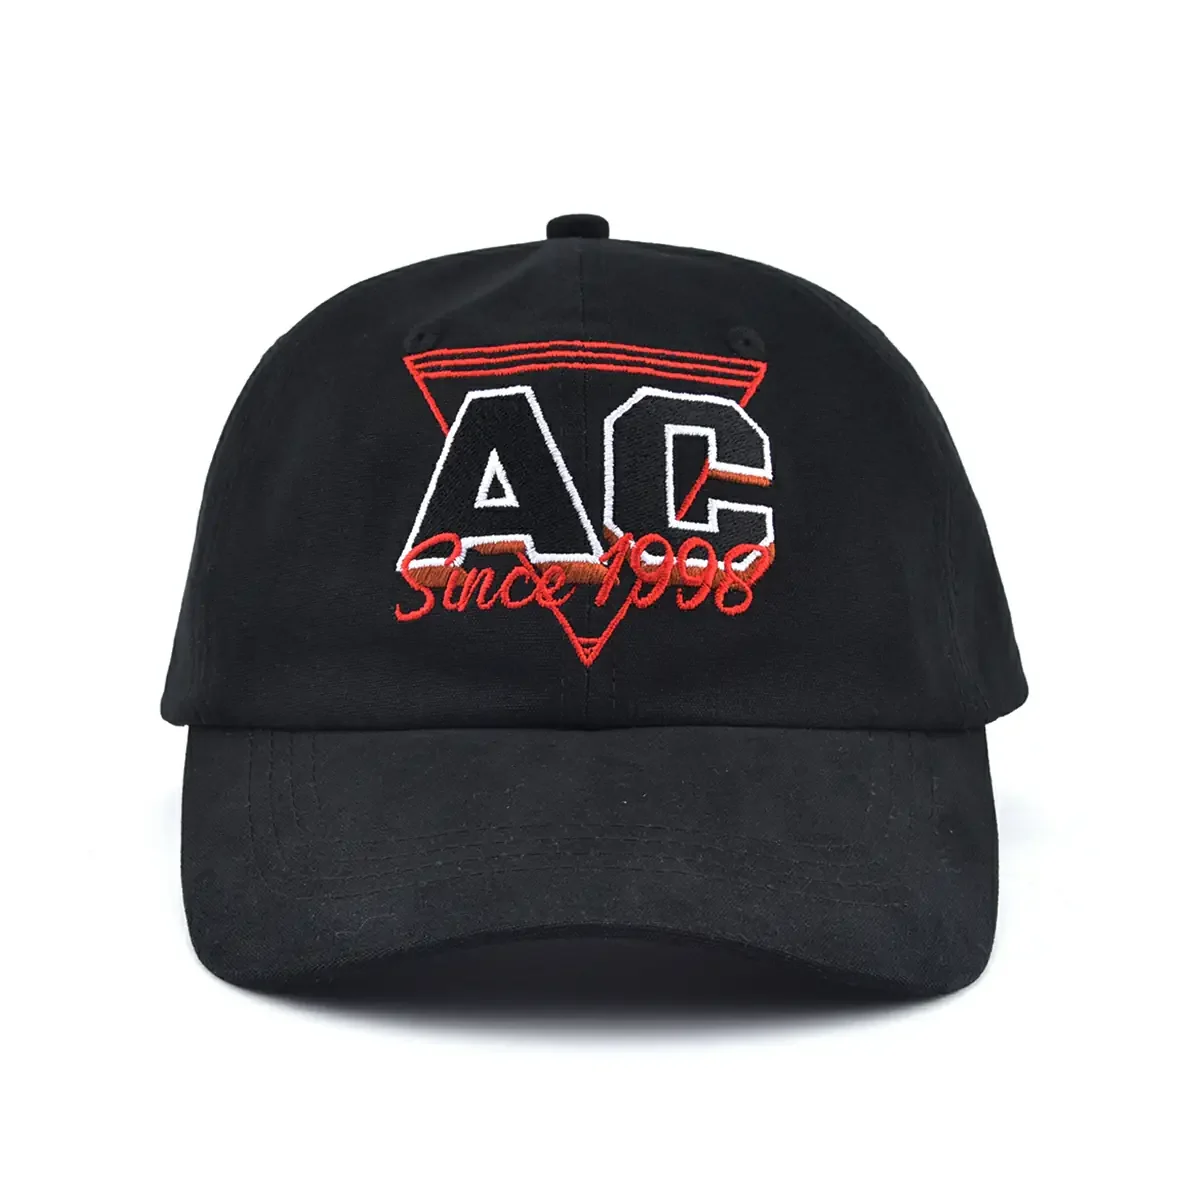 the-front-of-the-black-canvas-baseball-cap